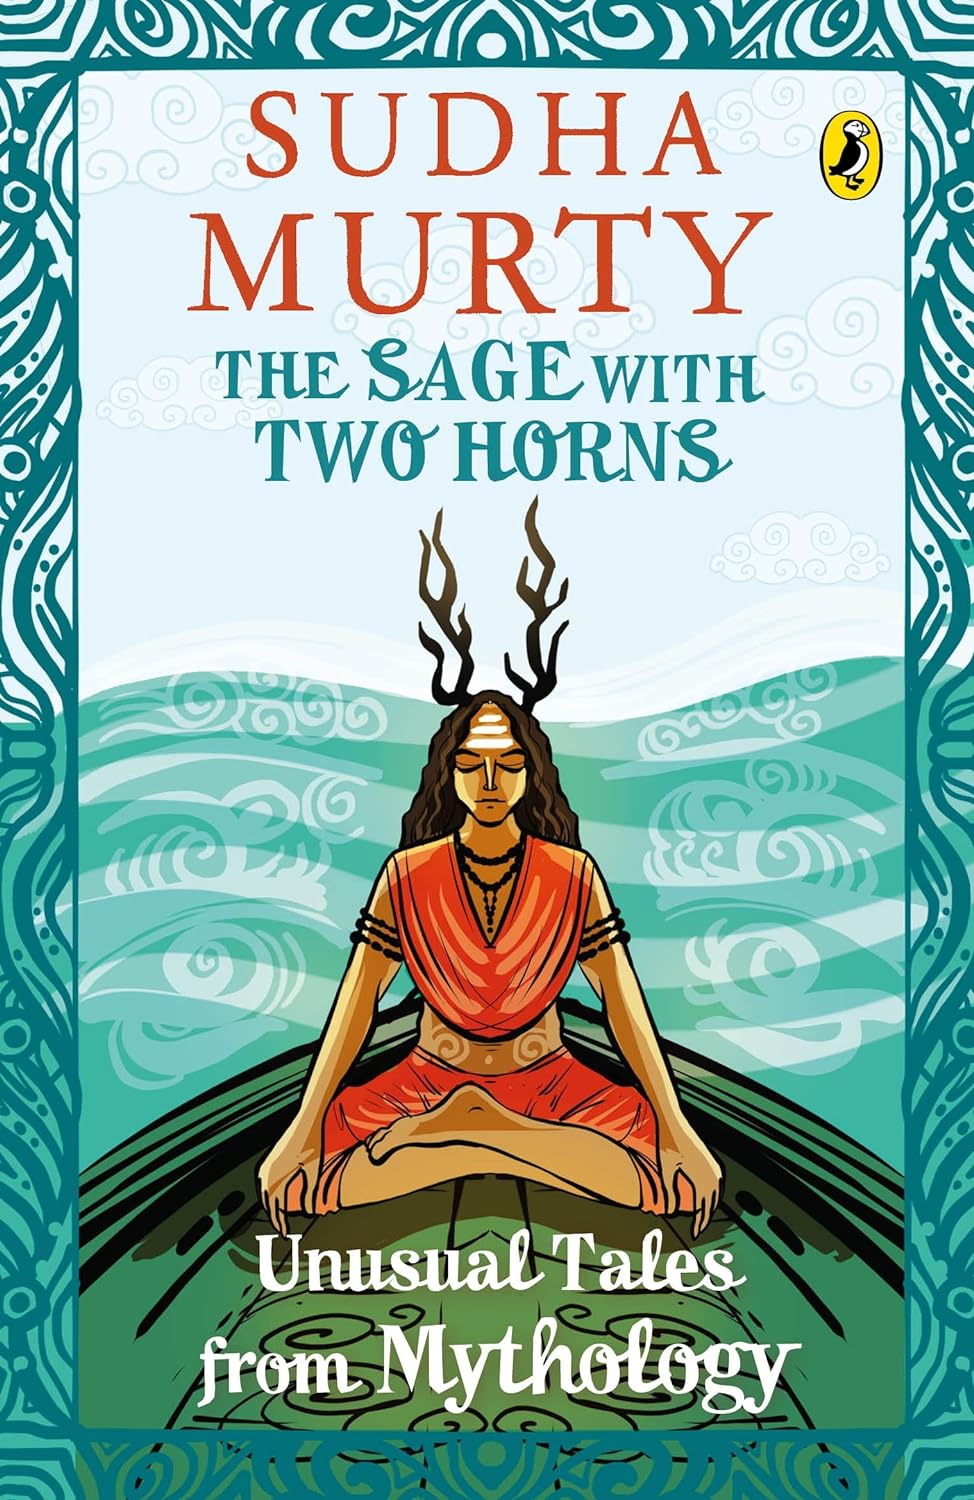 The Sage With Two Horns: Unusual Tales from Mythology by Sudha Murty